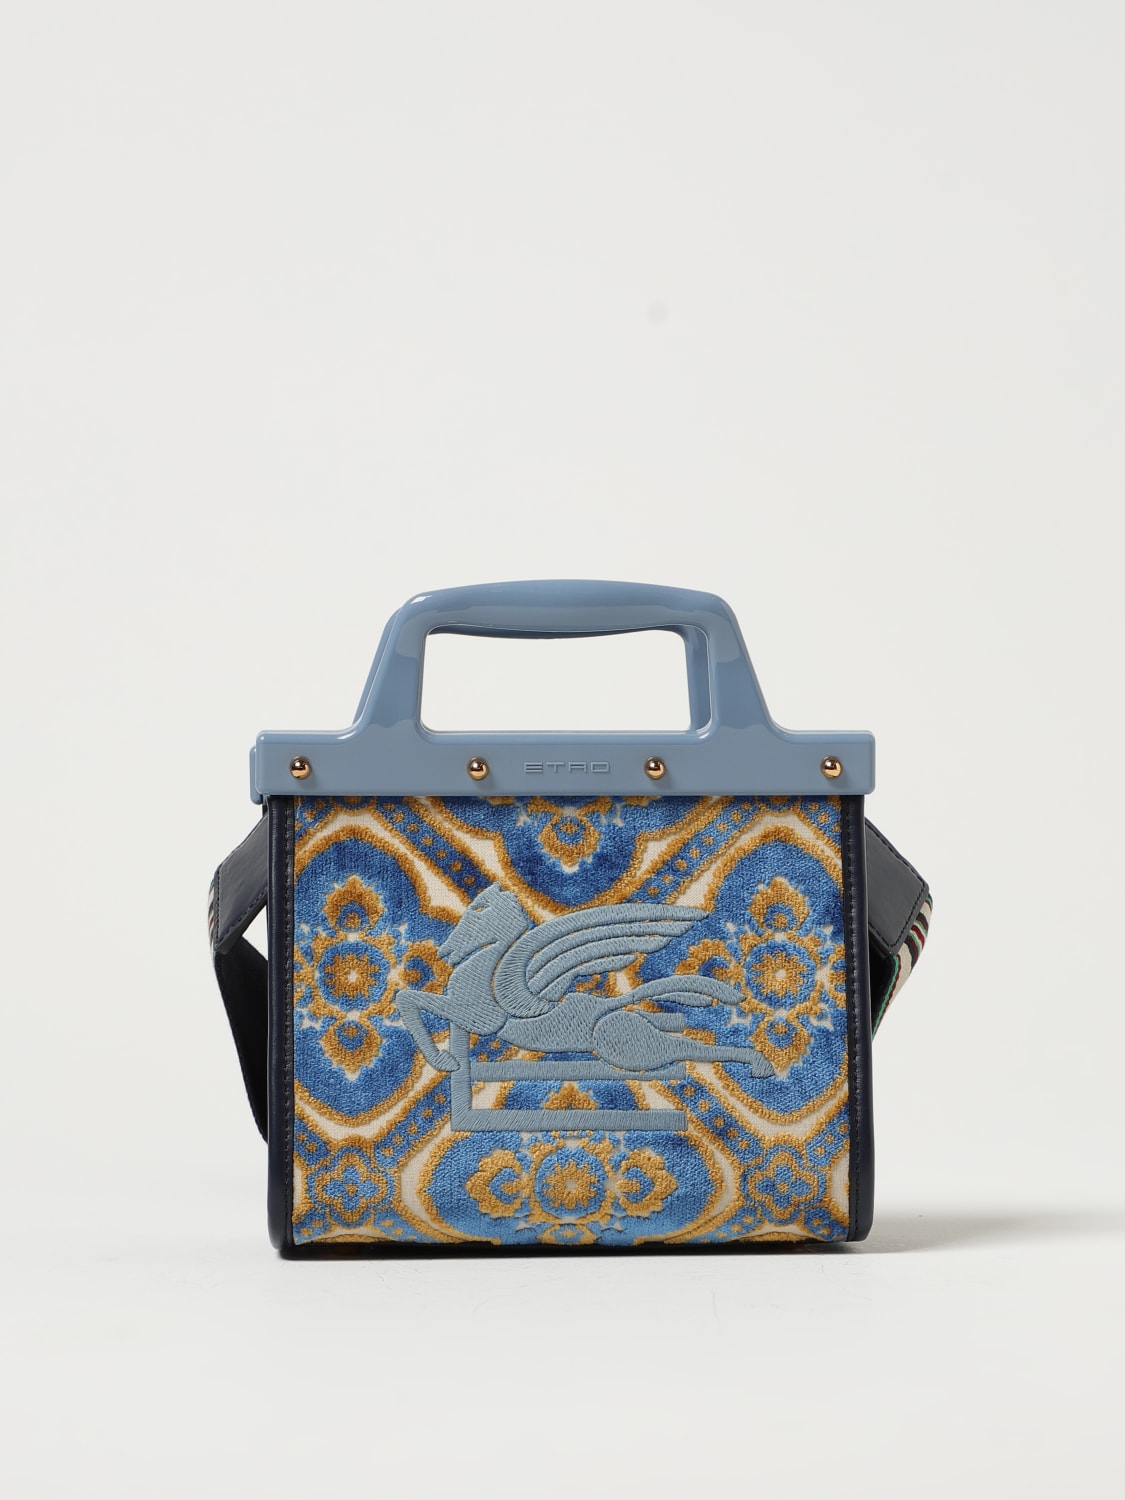 Love Trotter Small Jacquard Tote Bag in Blue - Etro